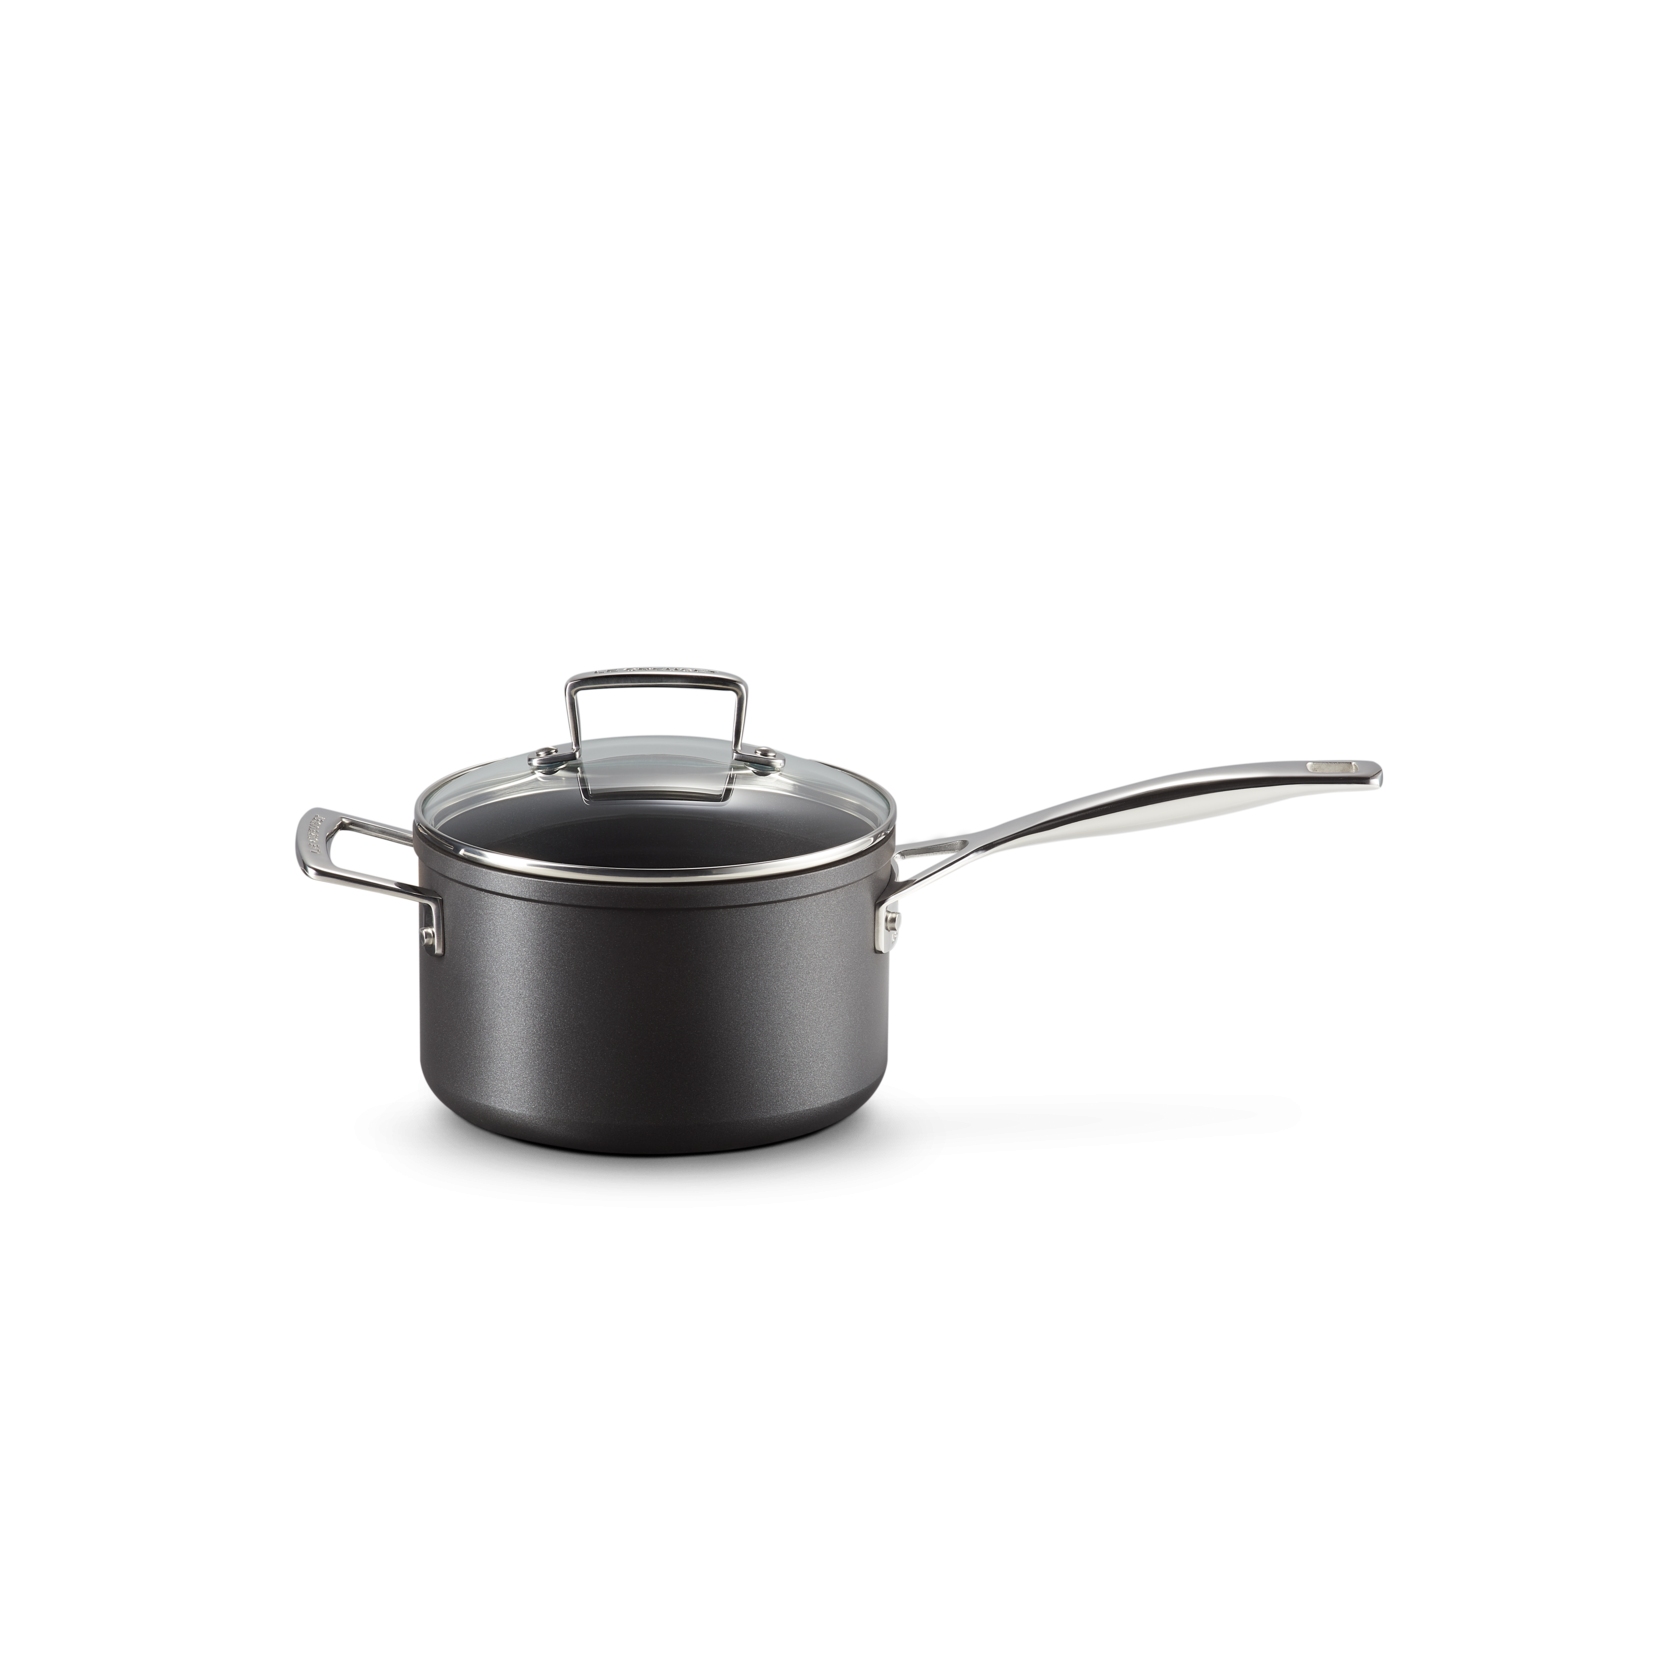 https://www.tattahome.com/52852-thickbox_default/le-creuset-non-stick-saucepan-with-handle-and-glass-lid-16.jpg